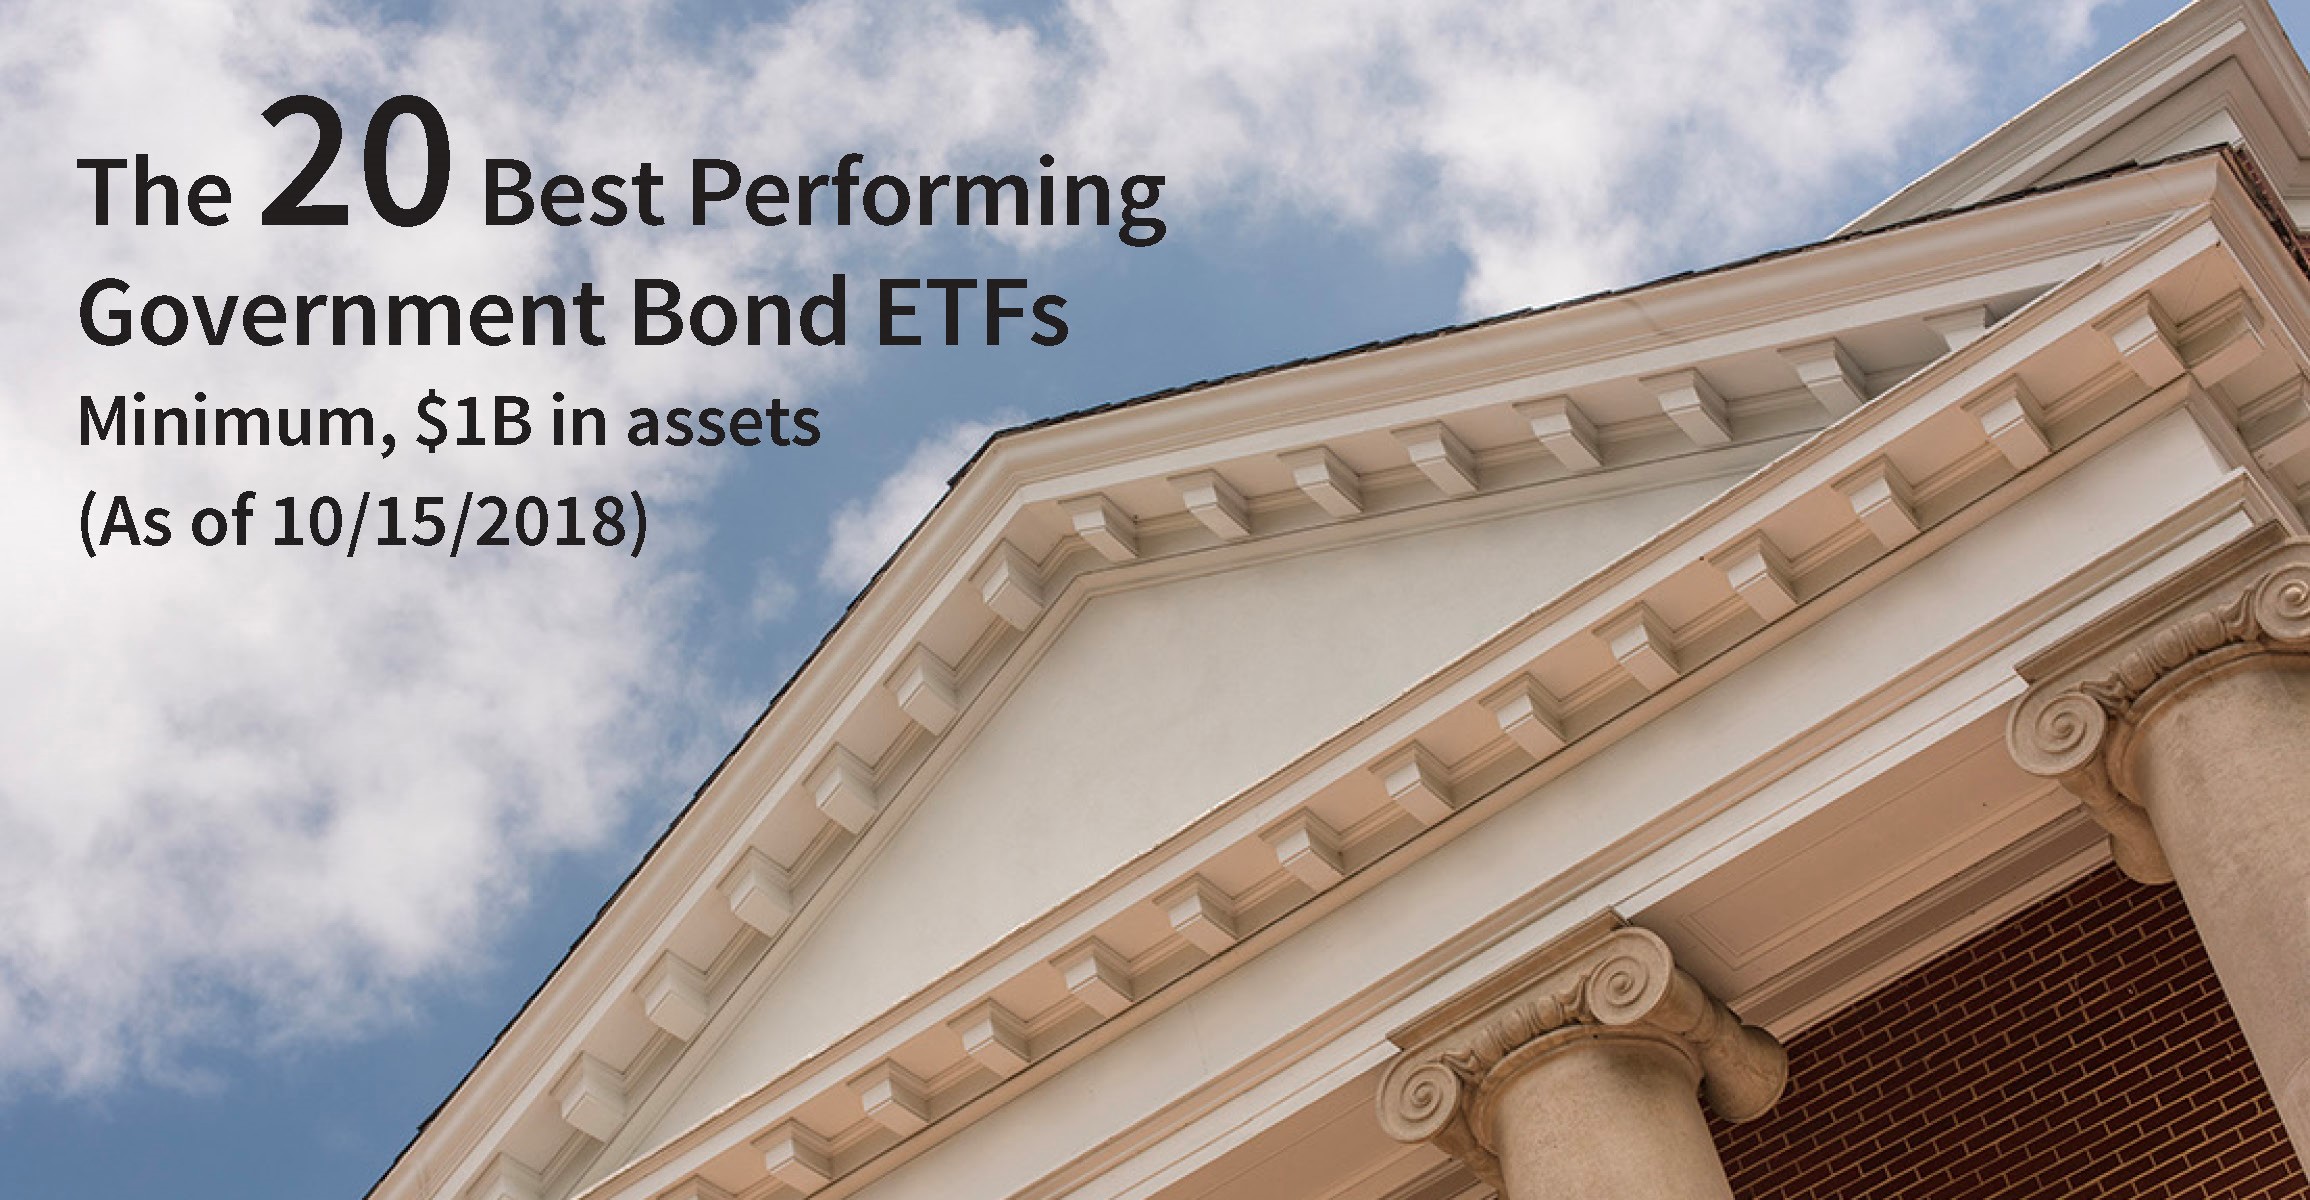 The 20 Best Performing Government Bond ETFs Wealth Management